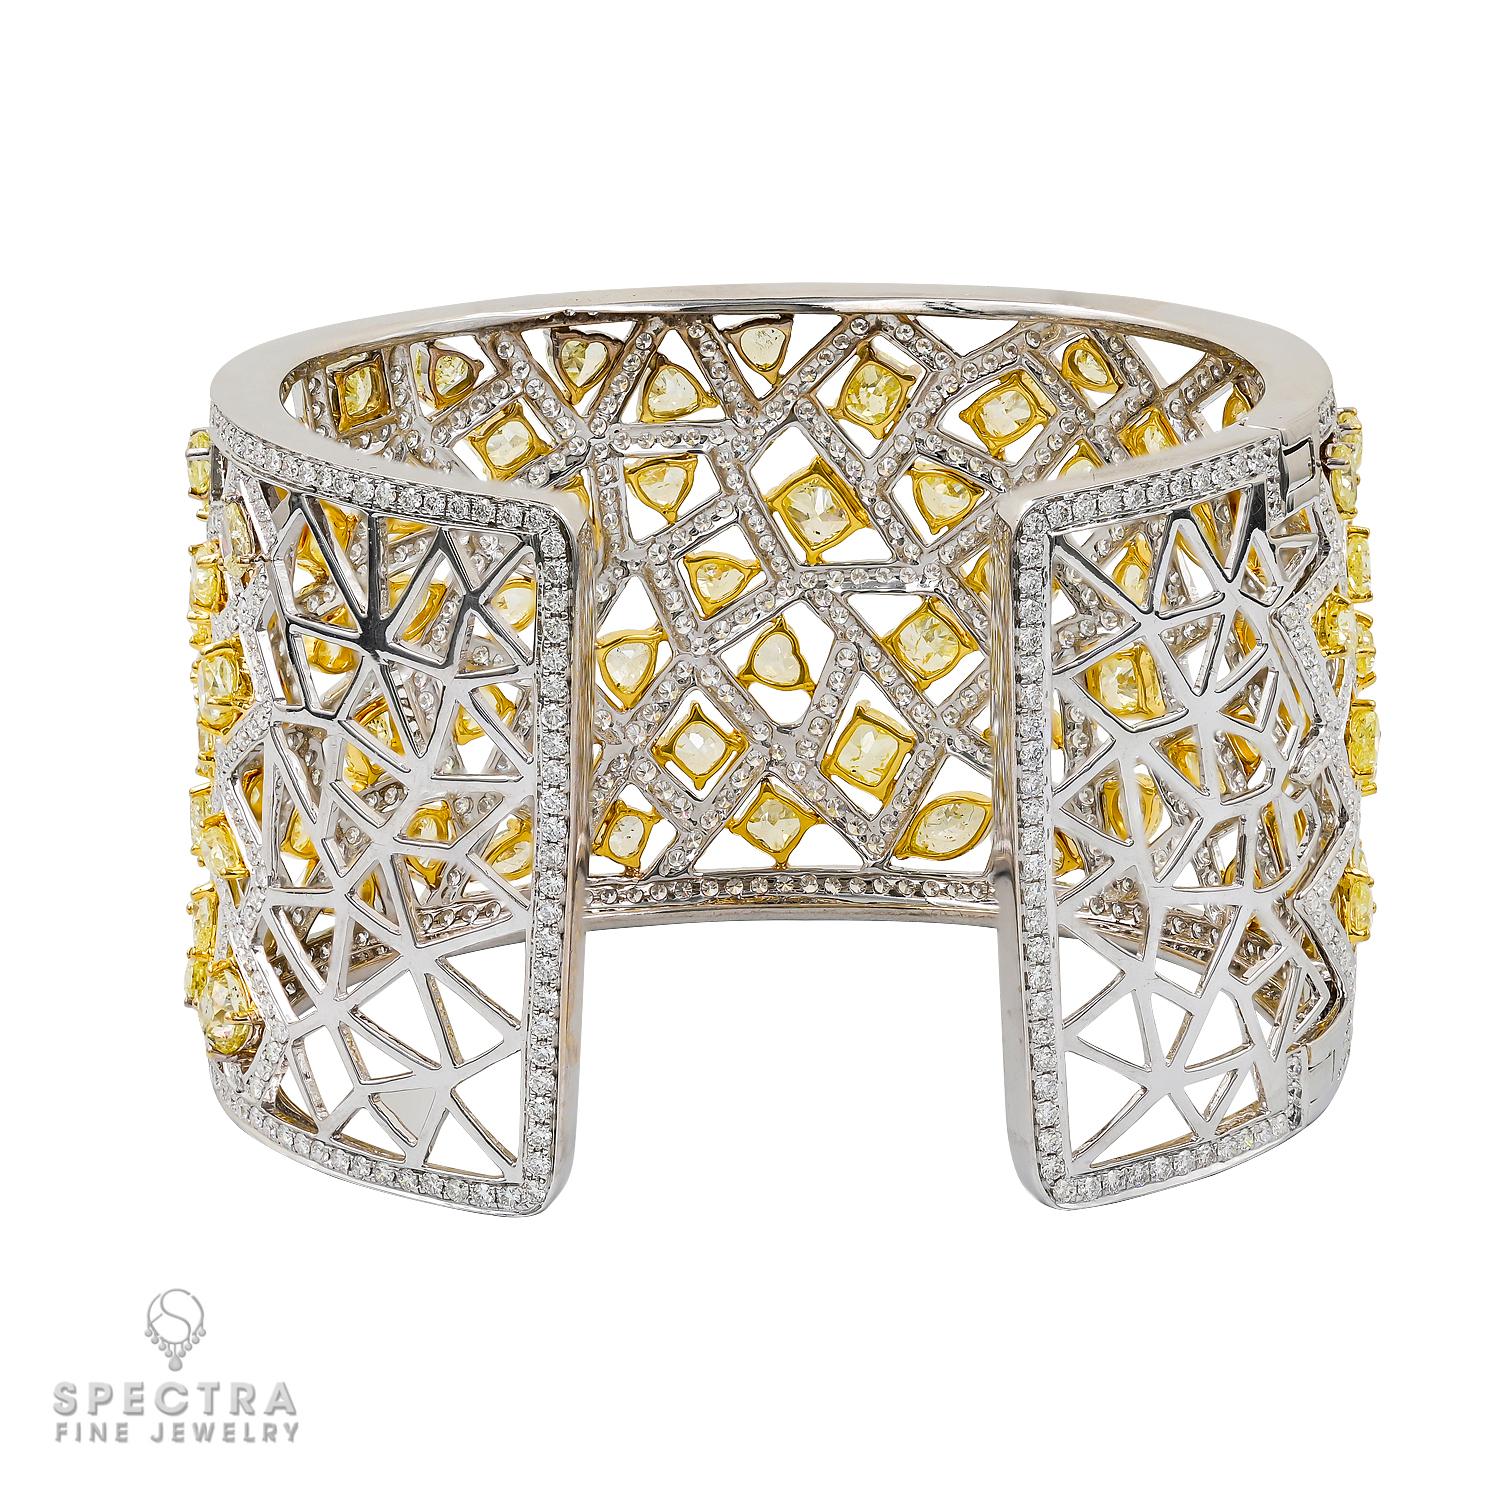 The Contemporary Yellow Diamond Pavé Cuff Bracelet is a stunning piece crafted from 18K yellow and white gold, adorned with a mix of yellow and white diamonds. The 41.79 carats of fancy yellow diamonds, accompanied by Gemologic Laboratory reports,